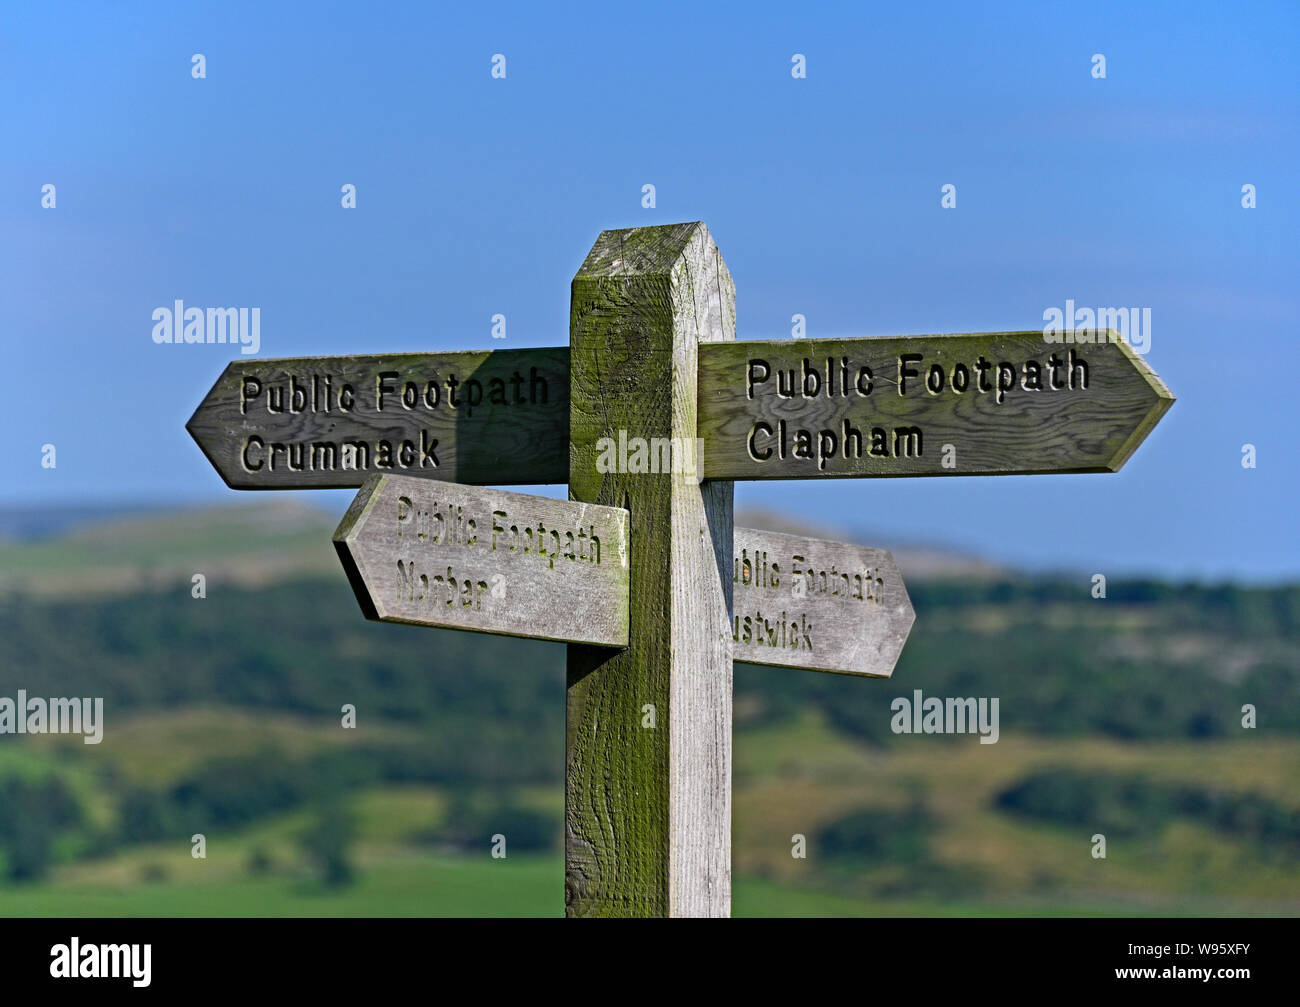 Public Footpath Direction fingerpost. Norber. Austwick, Yorkshire Dales National Park, Craven, North Yorkshire, England, United Kingdom, Europe. Stock Photo